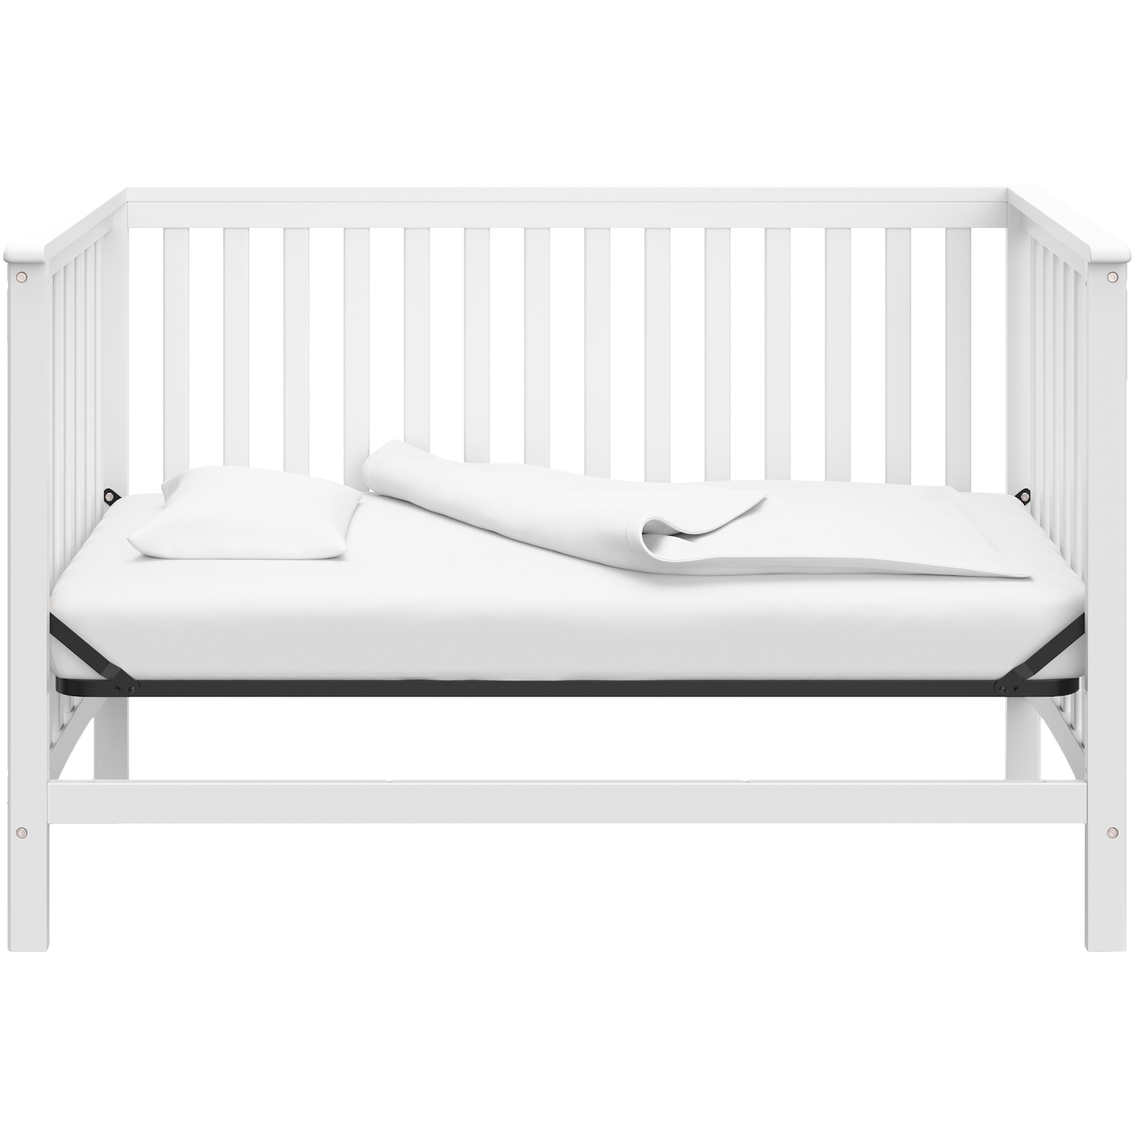 Storkcraft Hillcrest 4 in 1 Convertible Crib - Image 3 of 7